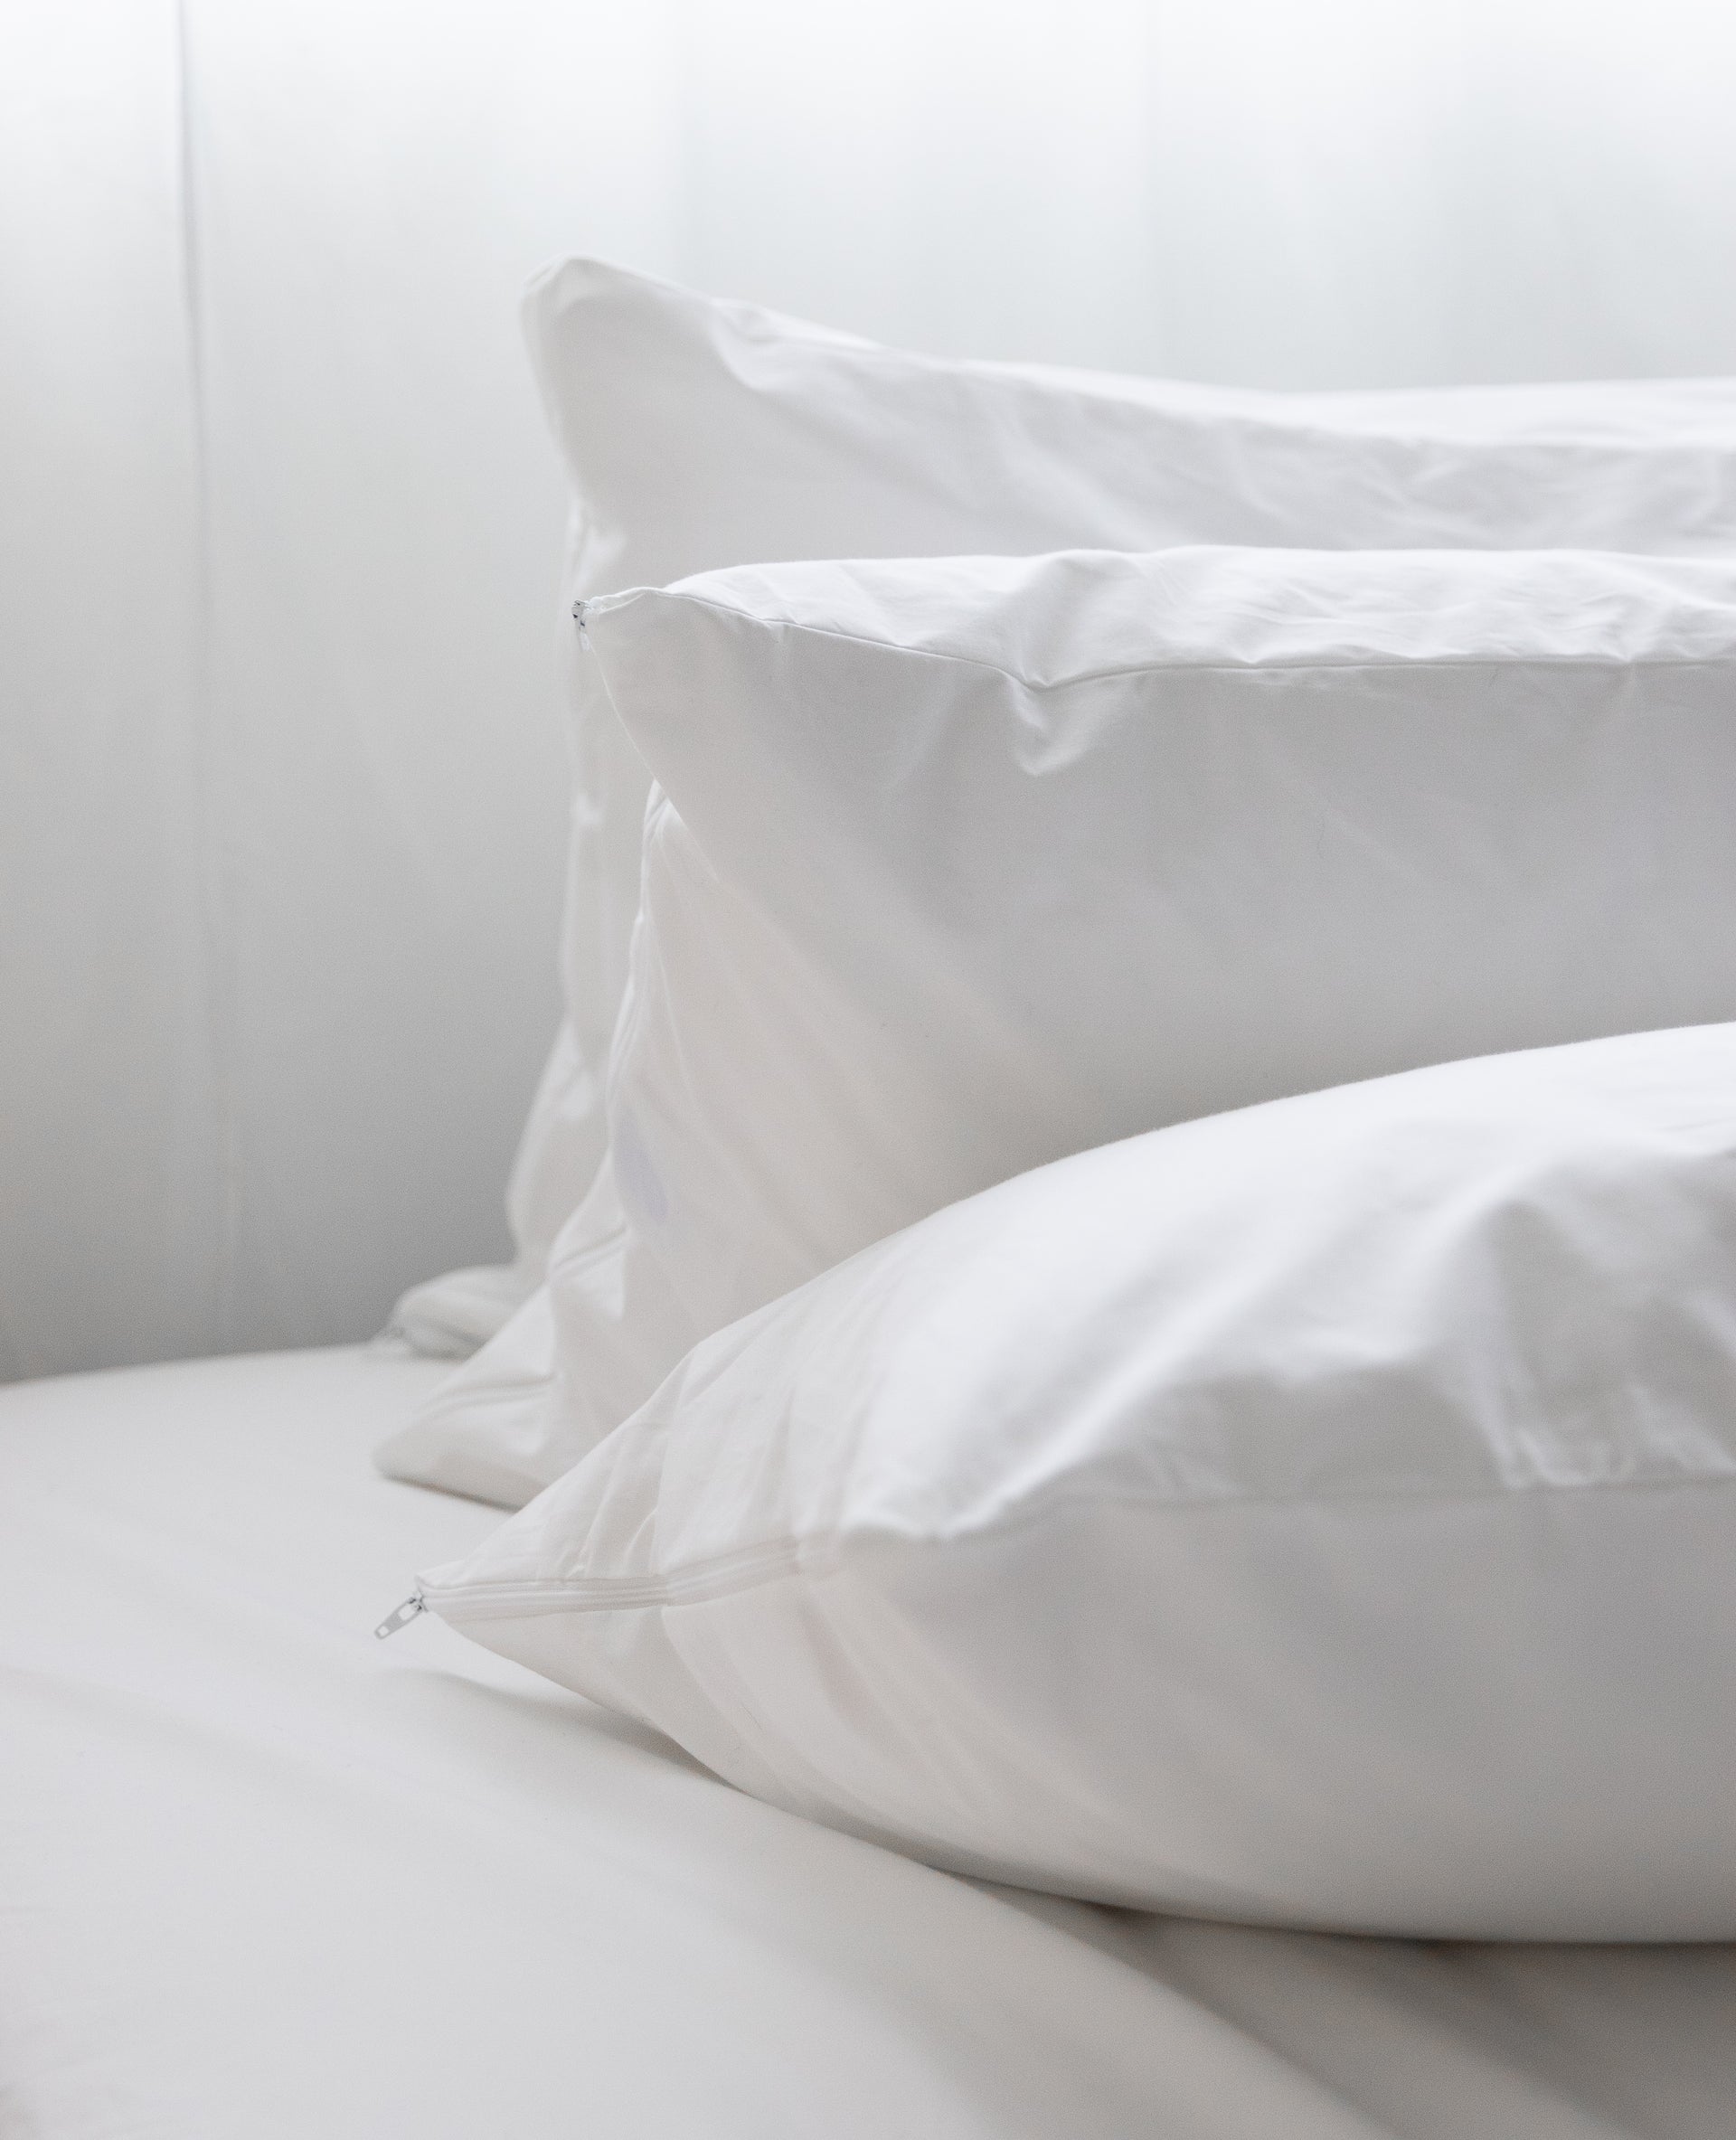 How To Choose A Pillow That's Just Right For Your Sleep - Forbes Vetted